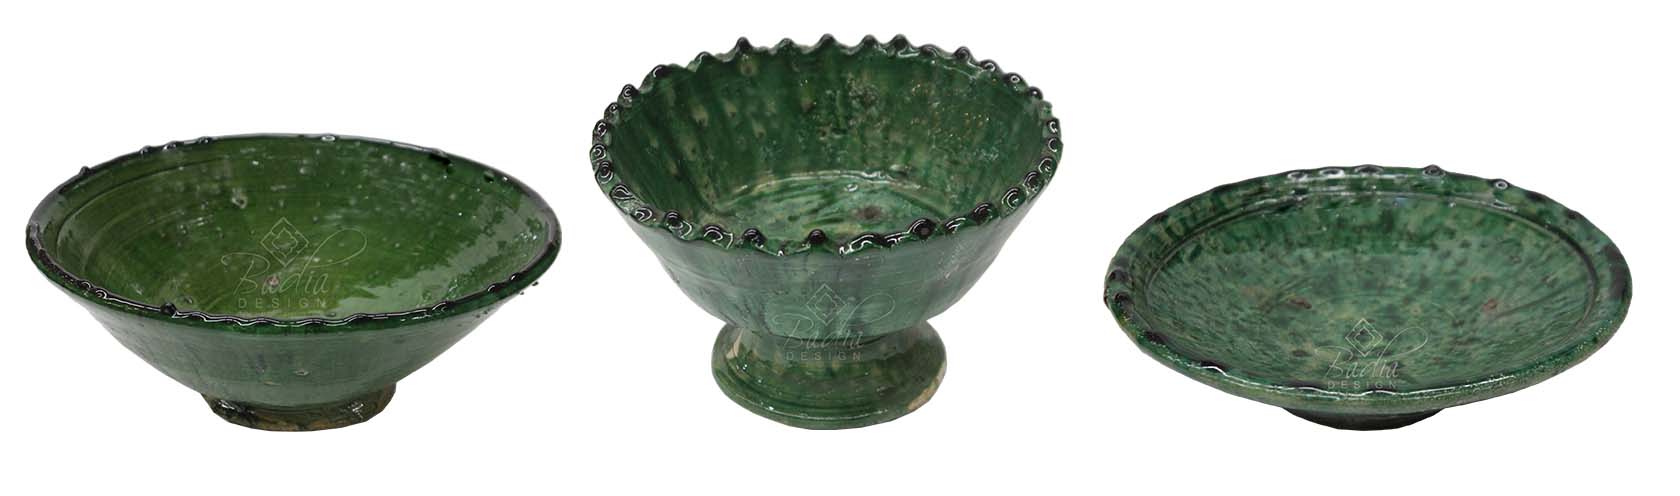 moroccan-green-tamegroute-pottery-cer-c008.jpg